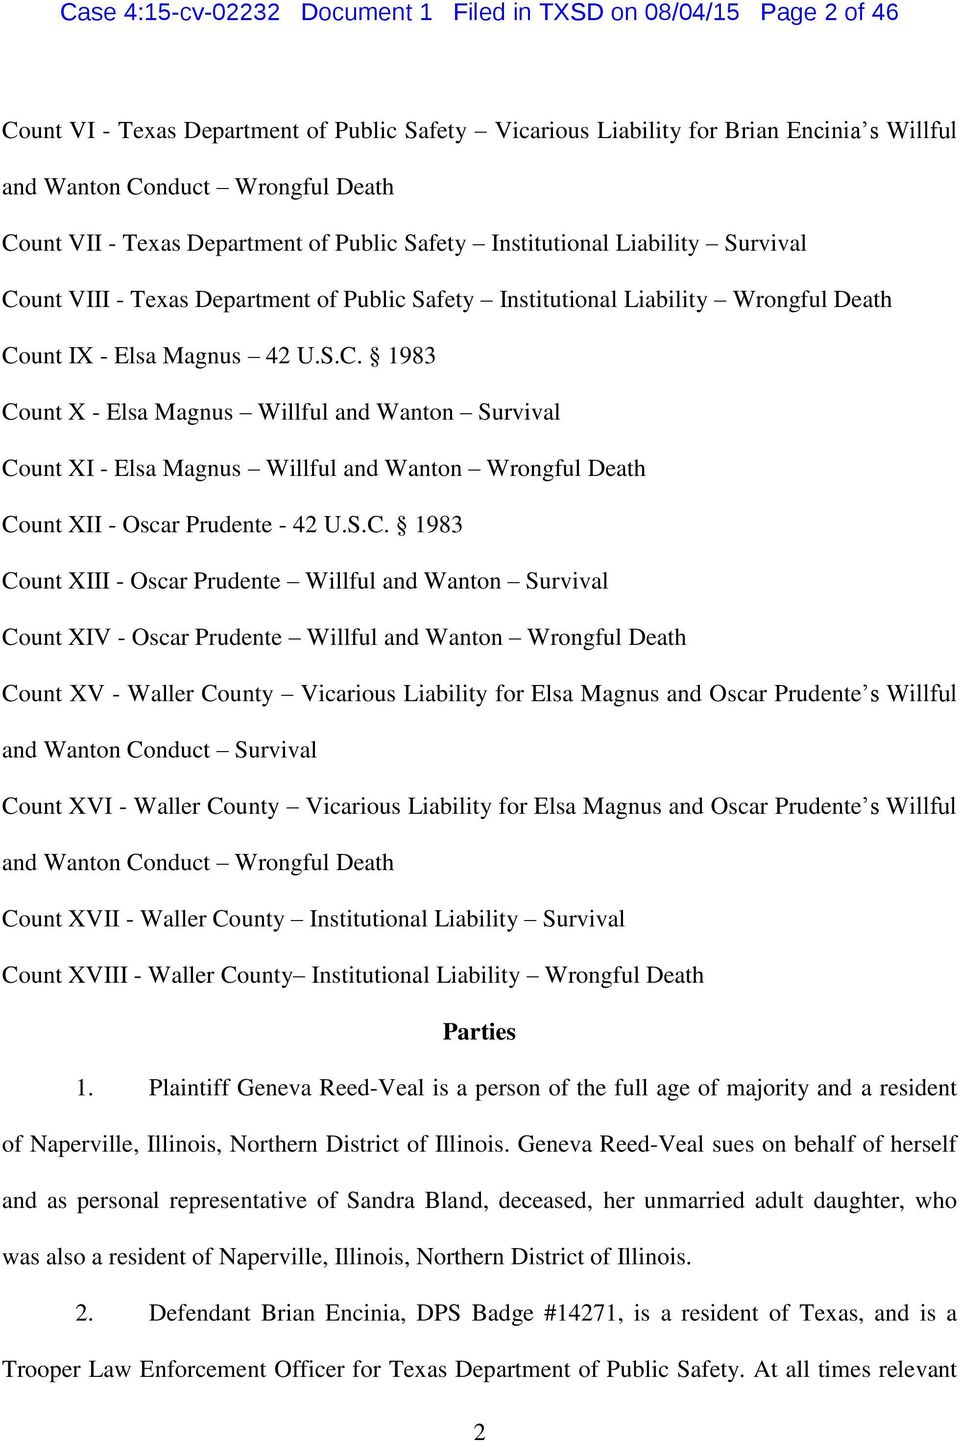 S.C. 1983 Count XIII - Oscar Prudente Willful and Wanton Survival Count XIV - Oscar Prudente Willful and Wanton Wrongful Death Count XV - Waller County Vicarious Liability for Elsa Magnus and Oscar